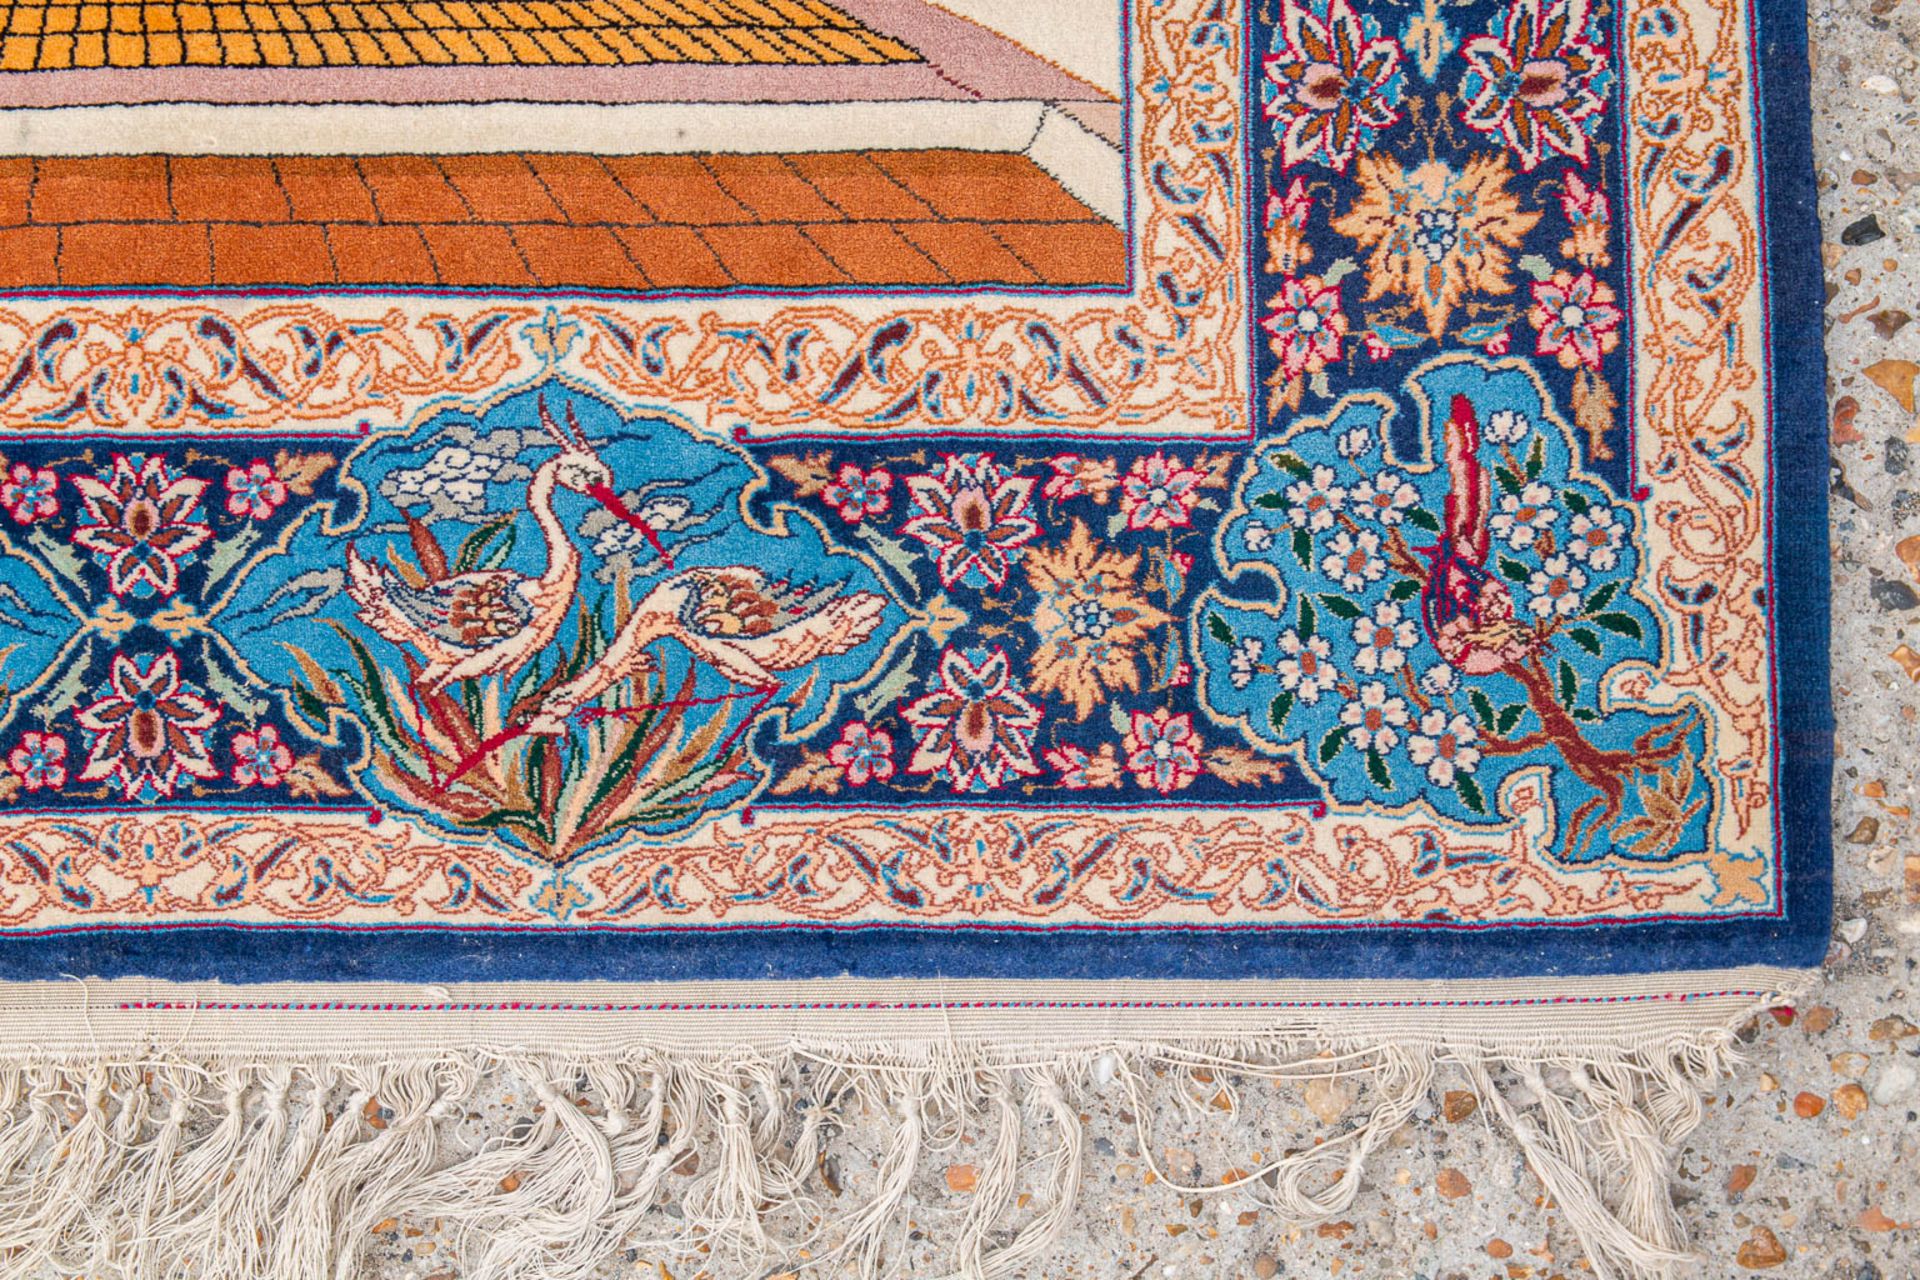 A figurative Oriental carpet, Tabriz, made of silk and wool. (161 x 109) (109 x 161 cm) - Image 2 of 5